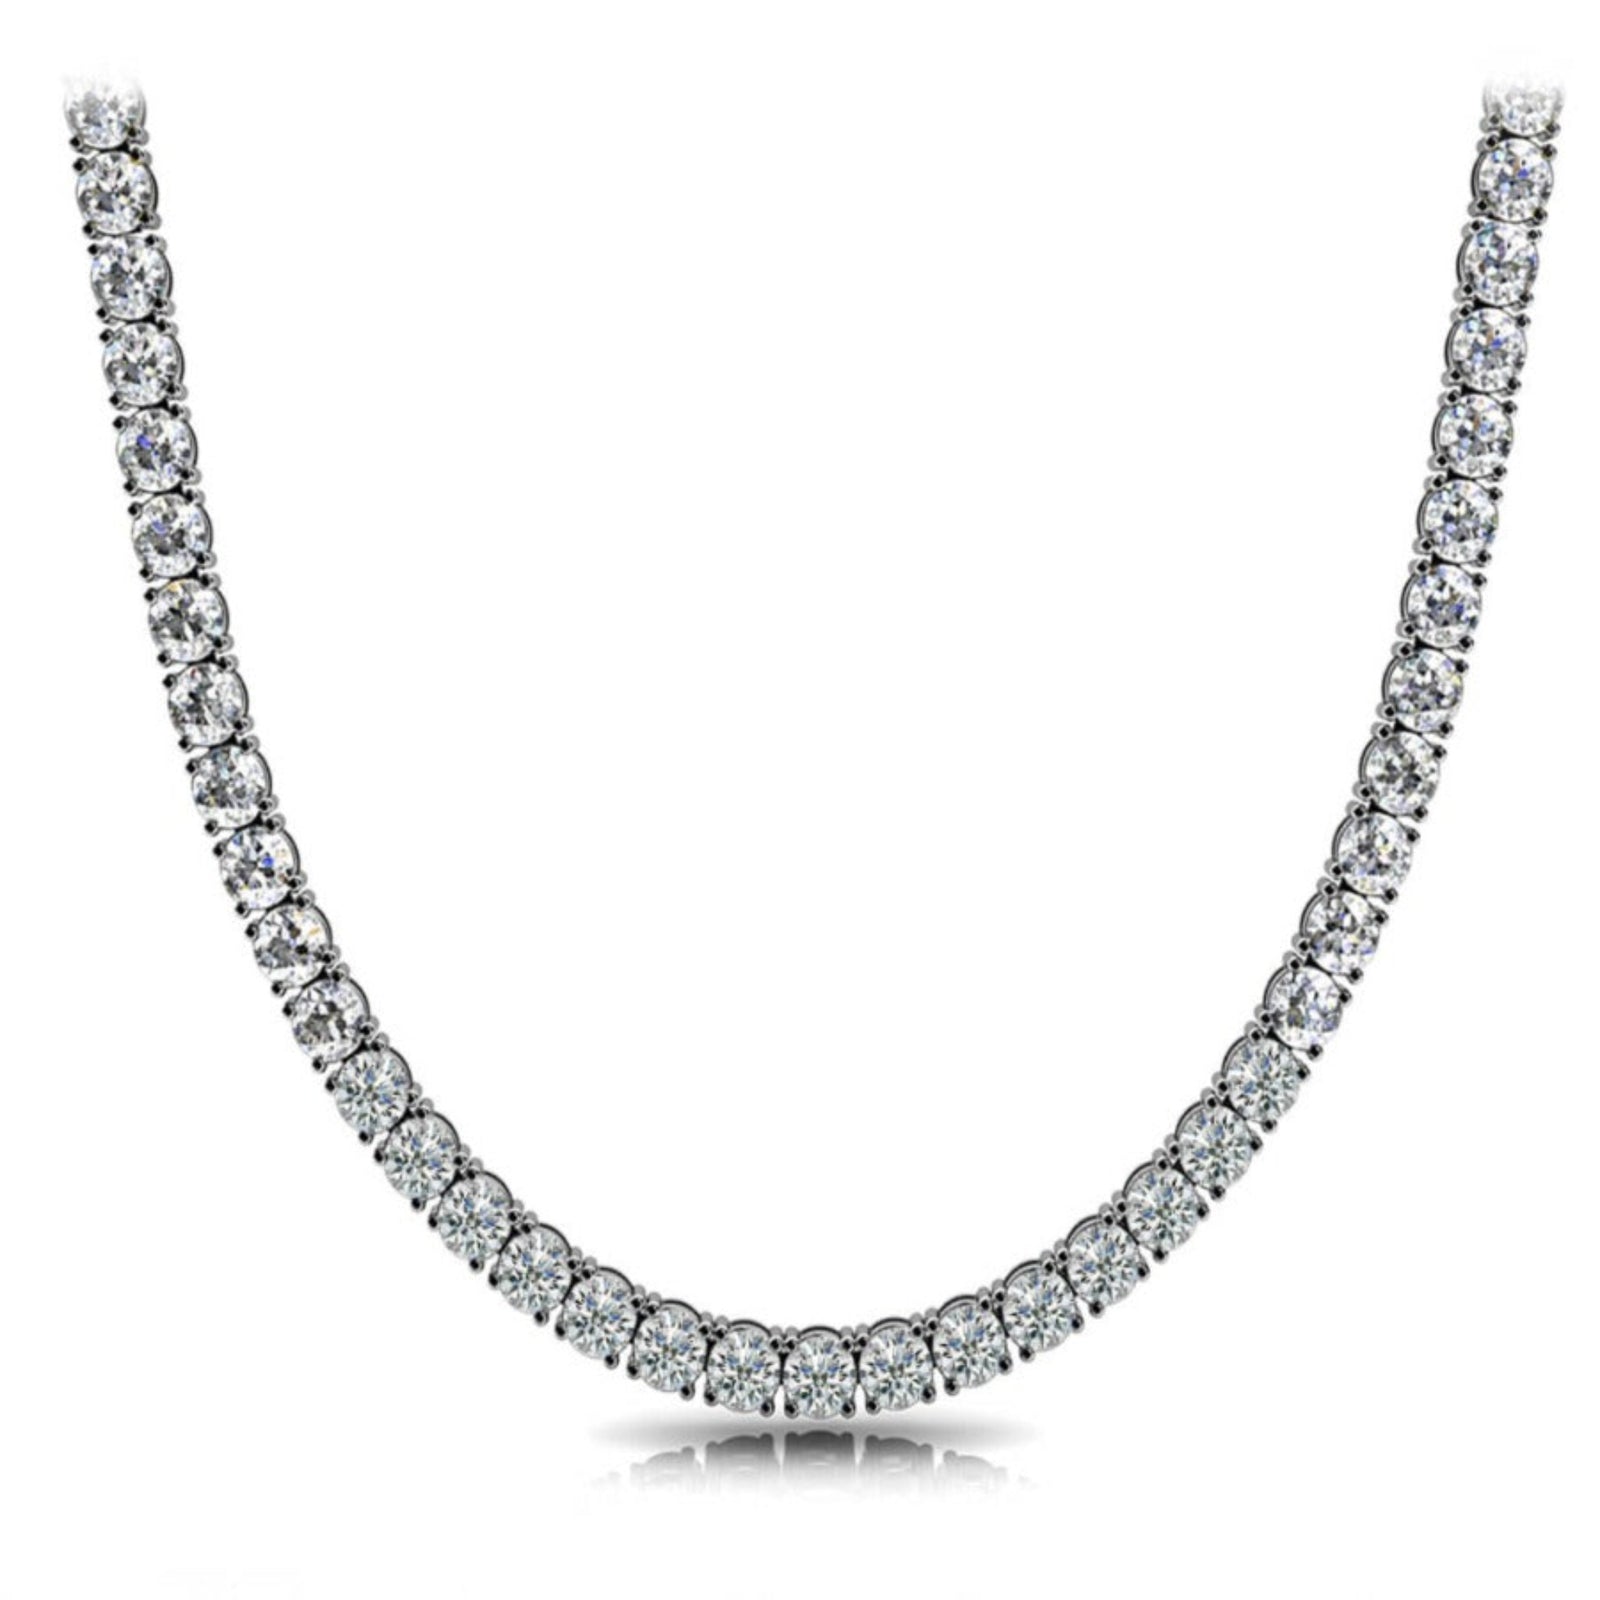 The Claire 4.00ct Tennis Necklace